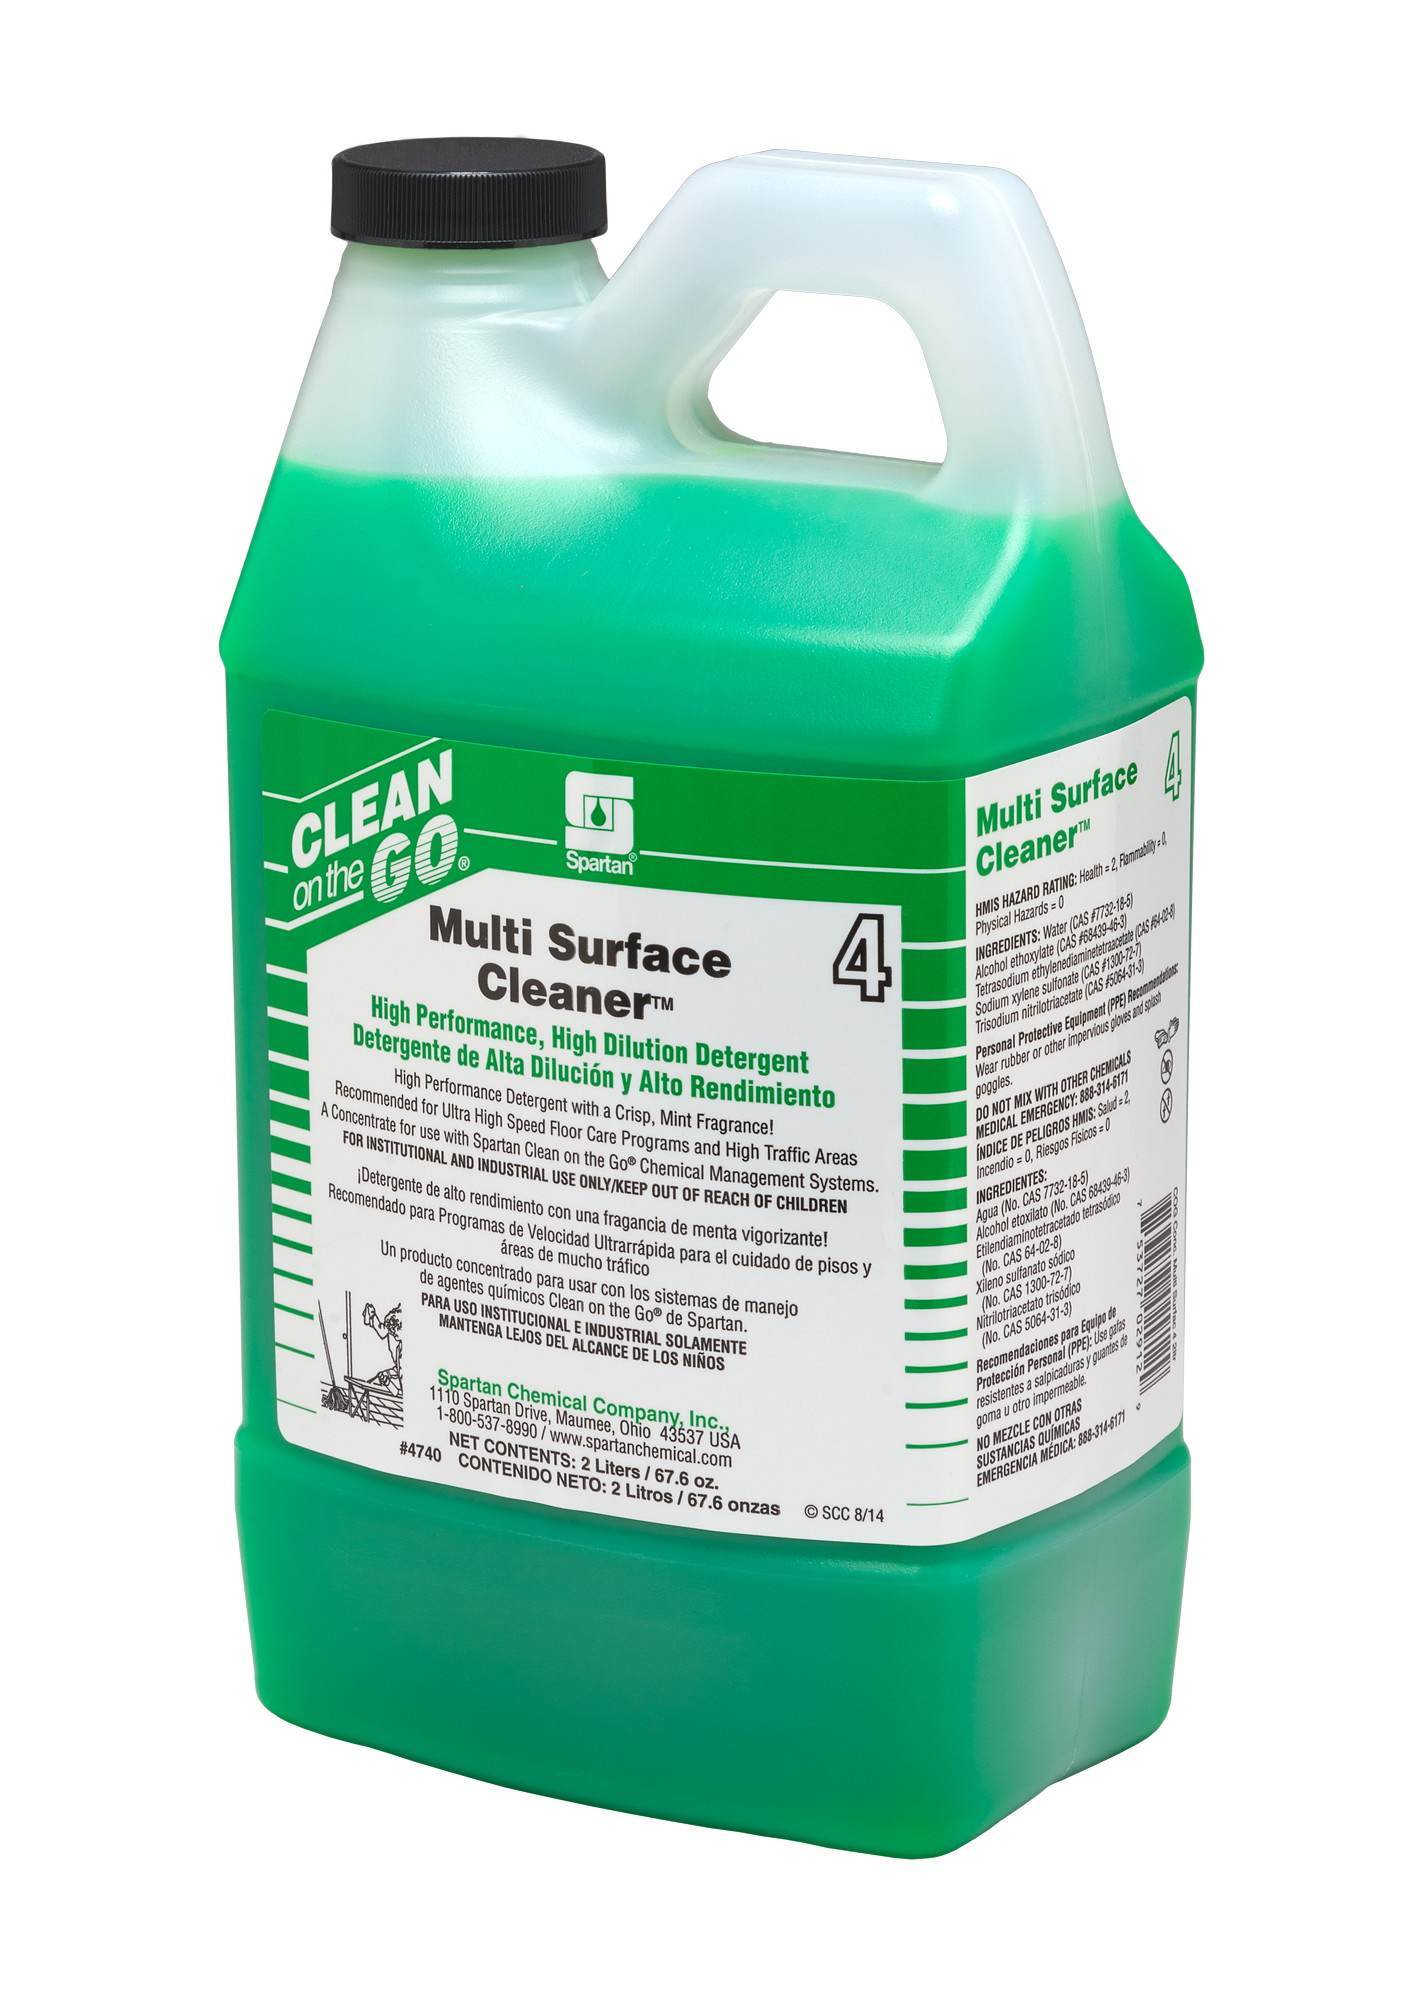 Spartan Chemical Company Multi Surface Cleaner 4, 2 Liter